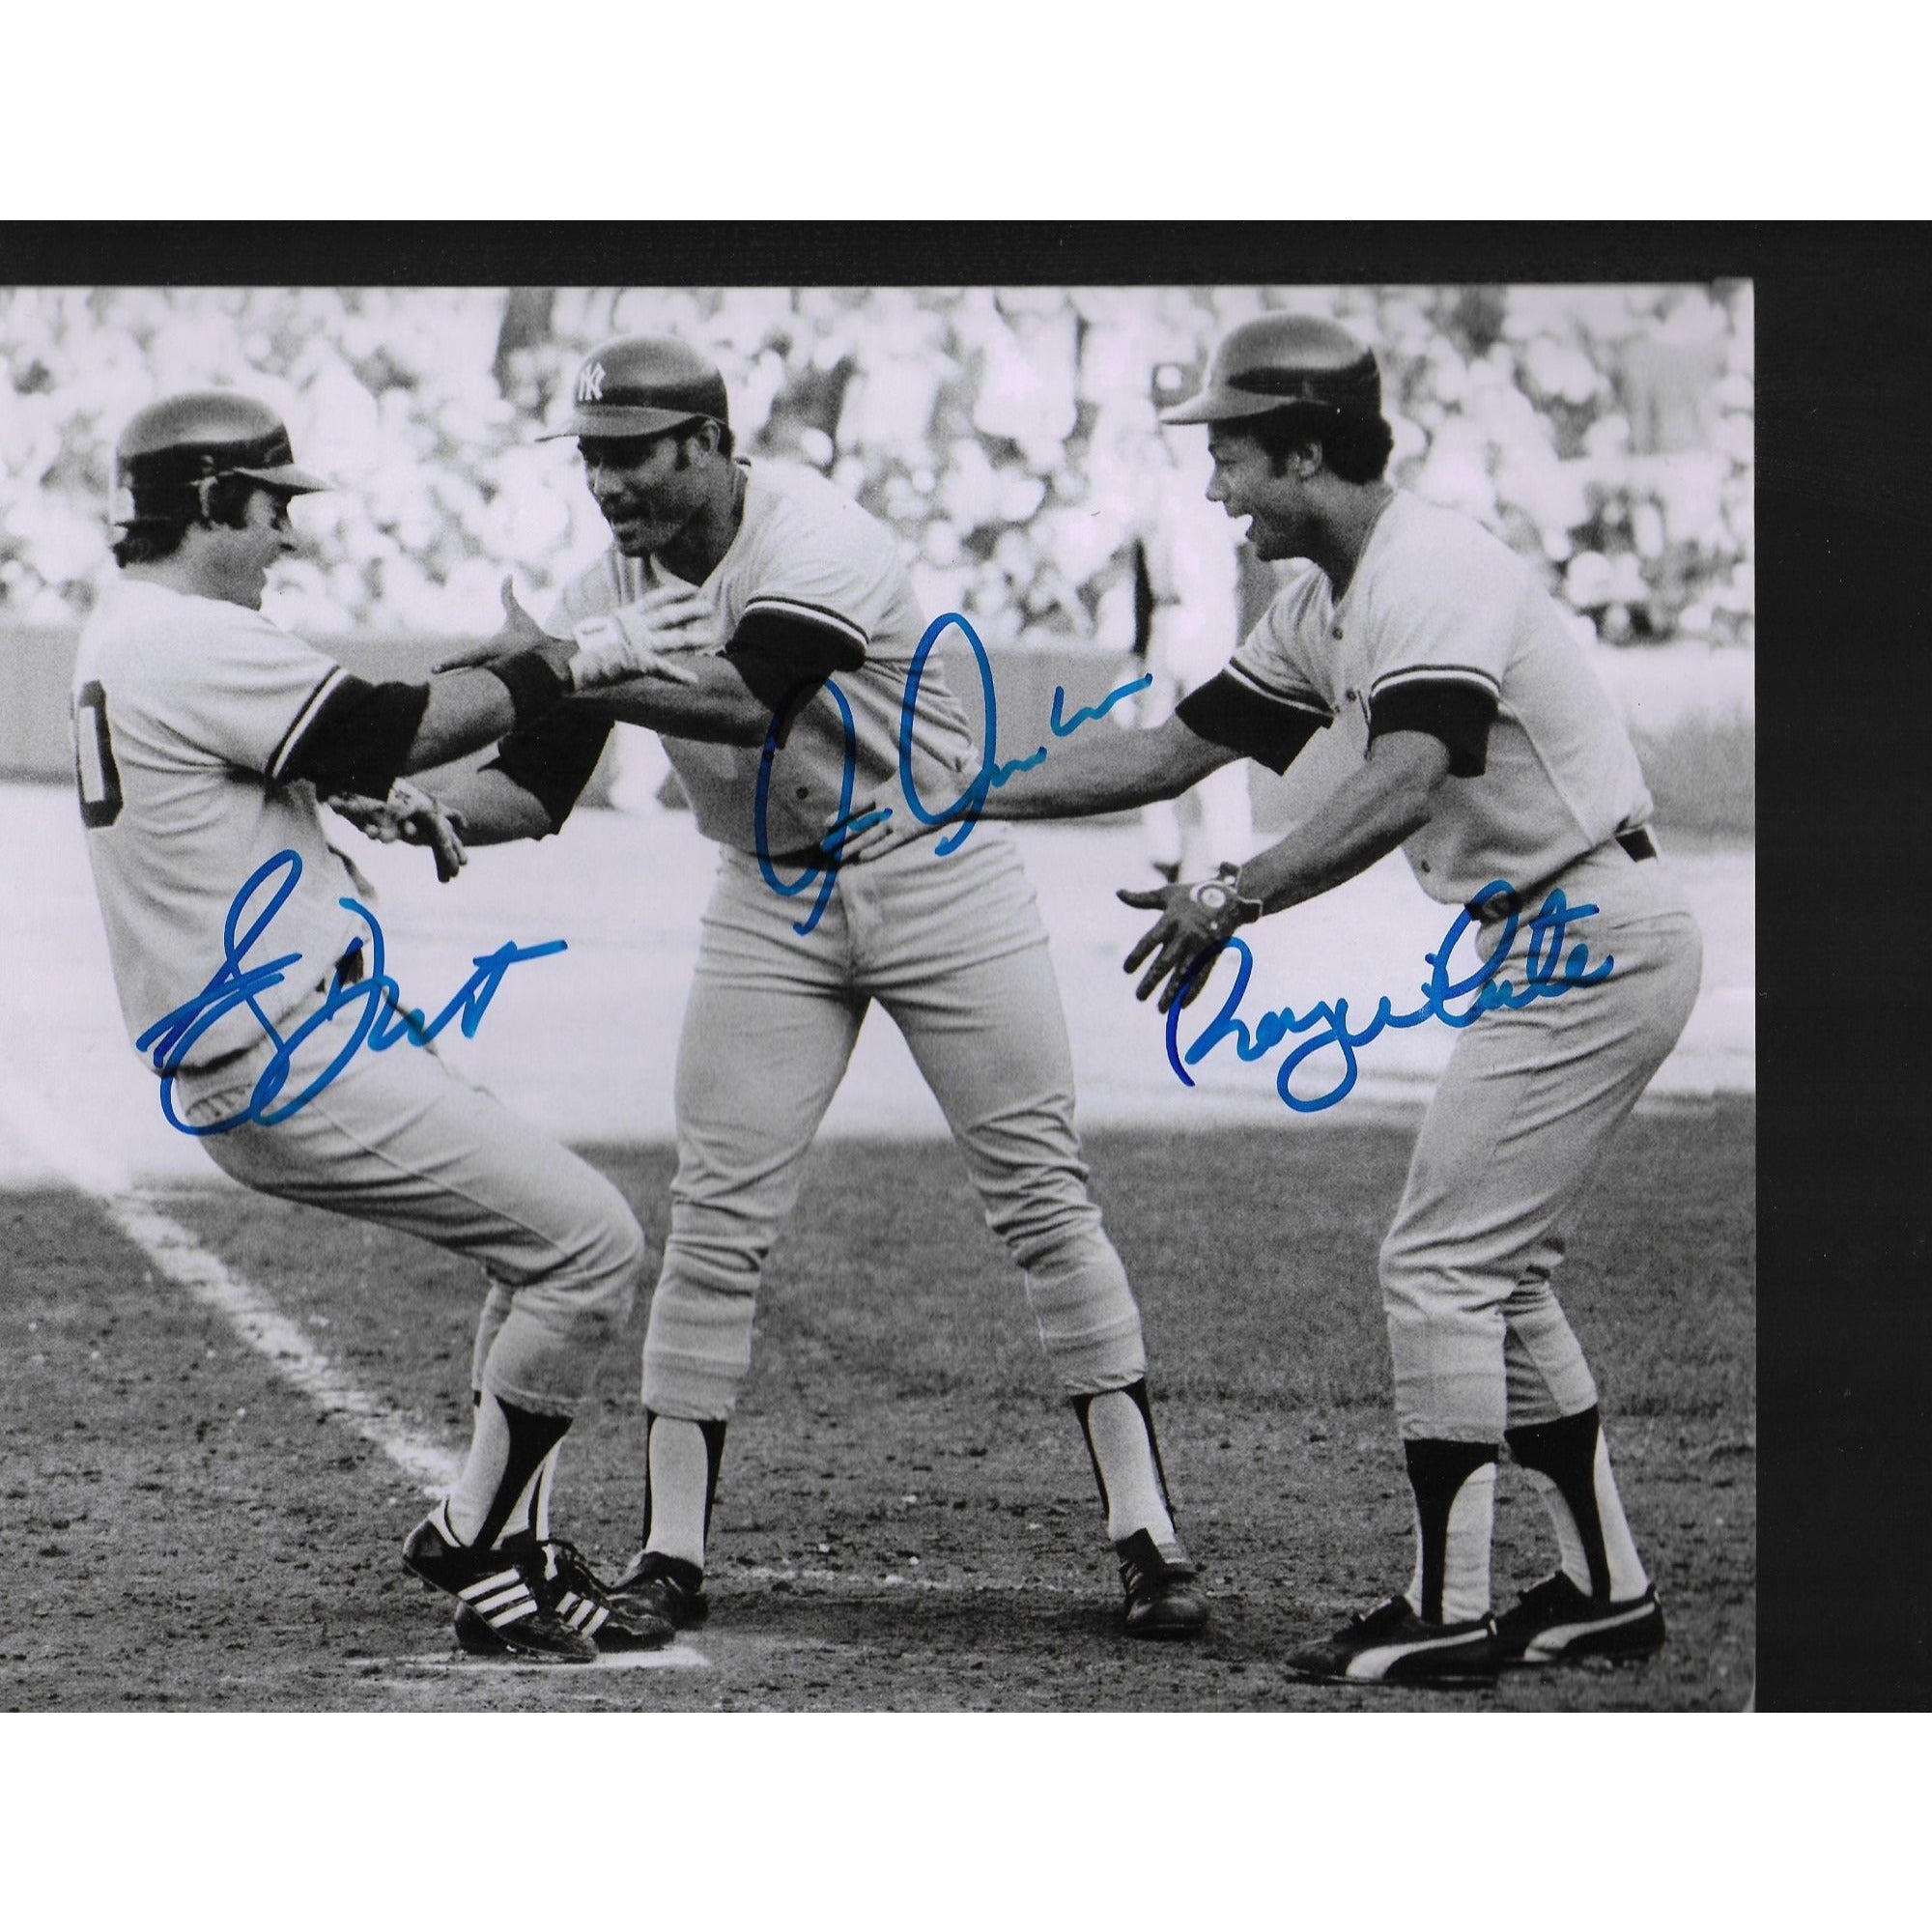 Bucky Dent Chris chambliss and Roy white 8 x 10 signed photo